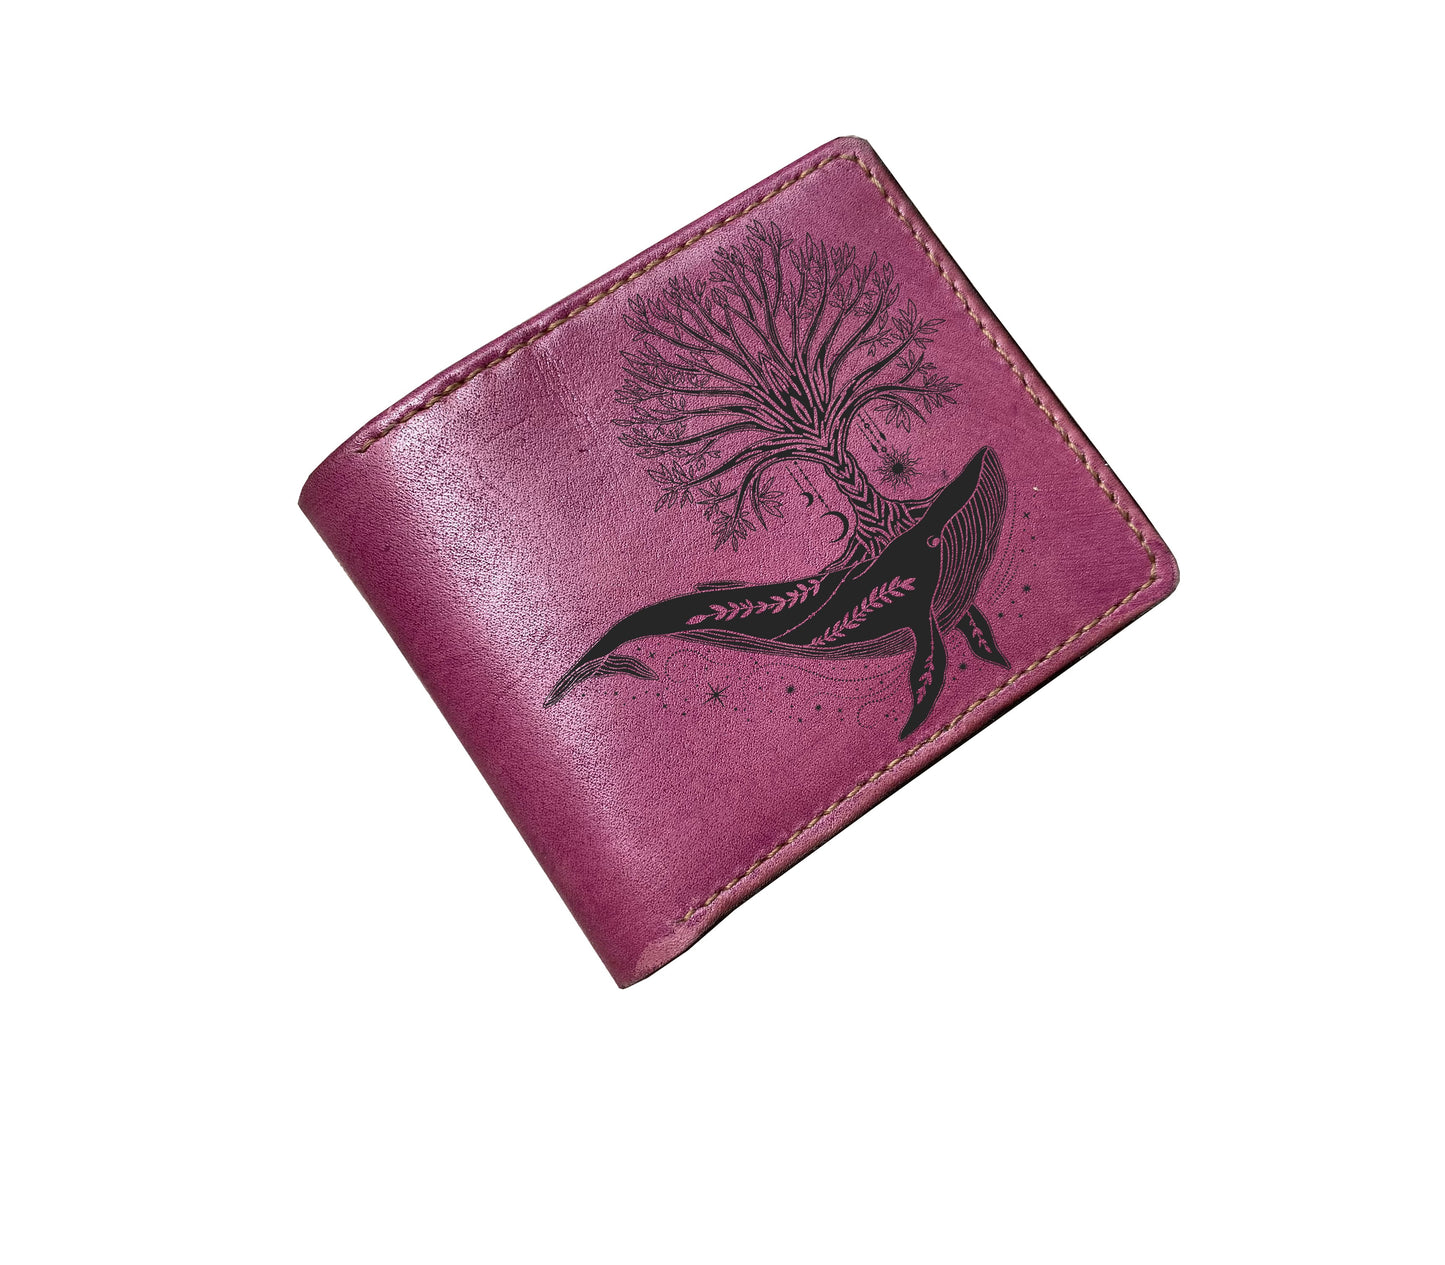 Mayan Corner - Whales genuine leather wallet, ocean sea animal pattern gift, customized leather wallet